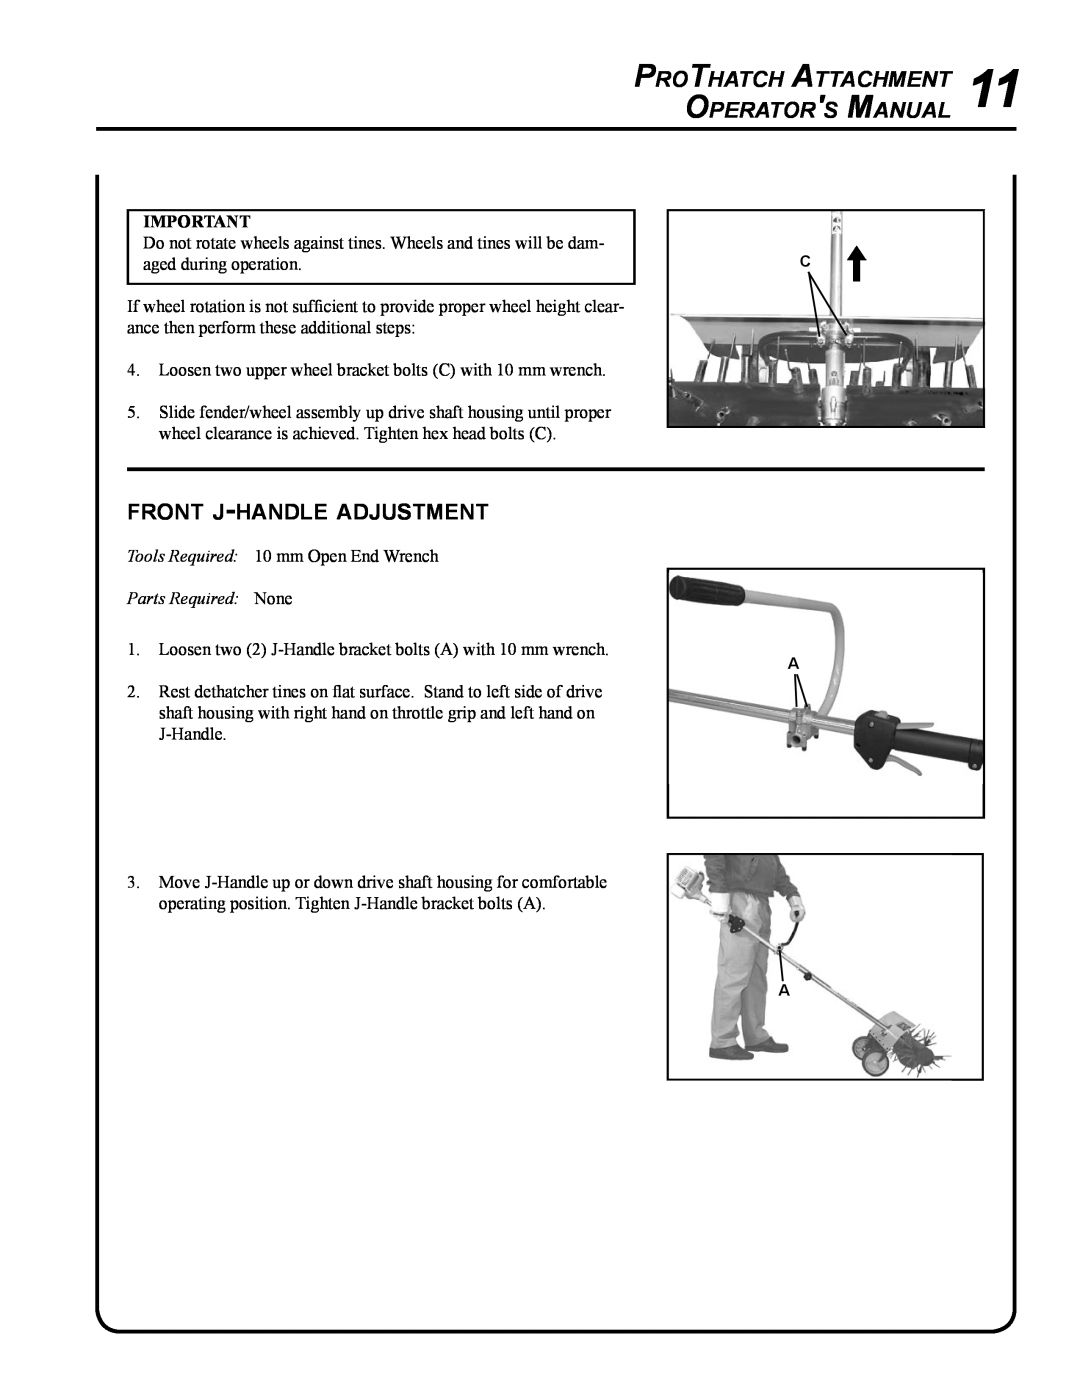 Echo 99944200563 manual ProThatch Attachment Operators Manual, front j-handleadjustment, Parts Required None 